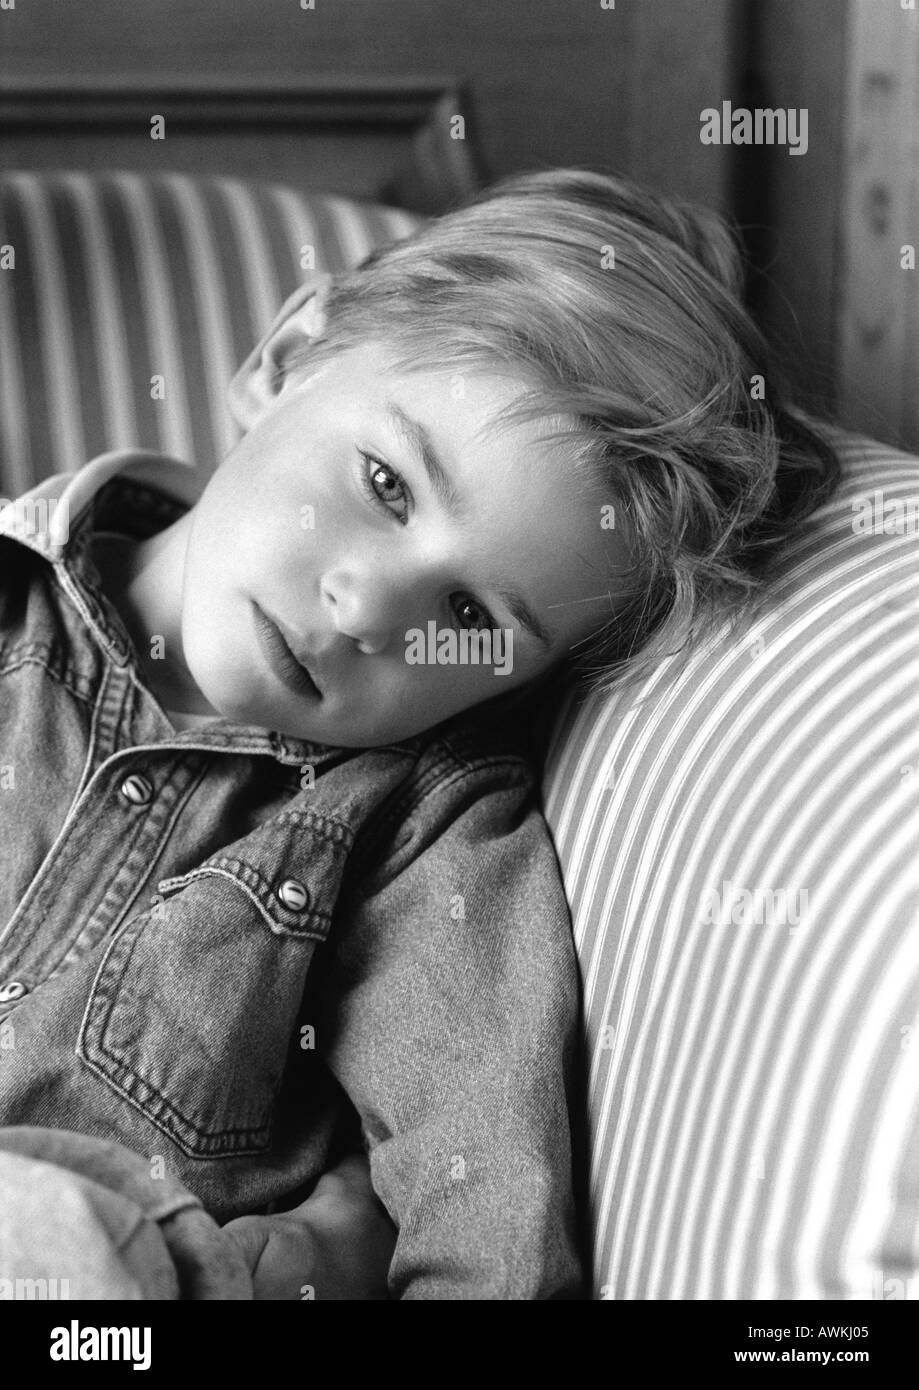 Young boy leaning head on chair arm, black and white portrait. Stock Photo